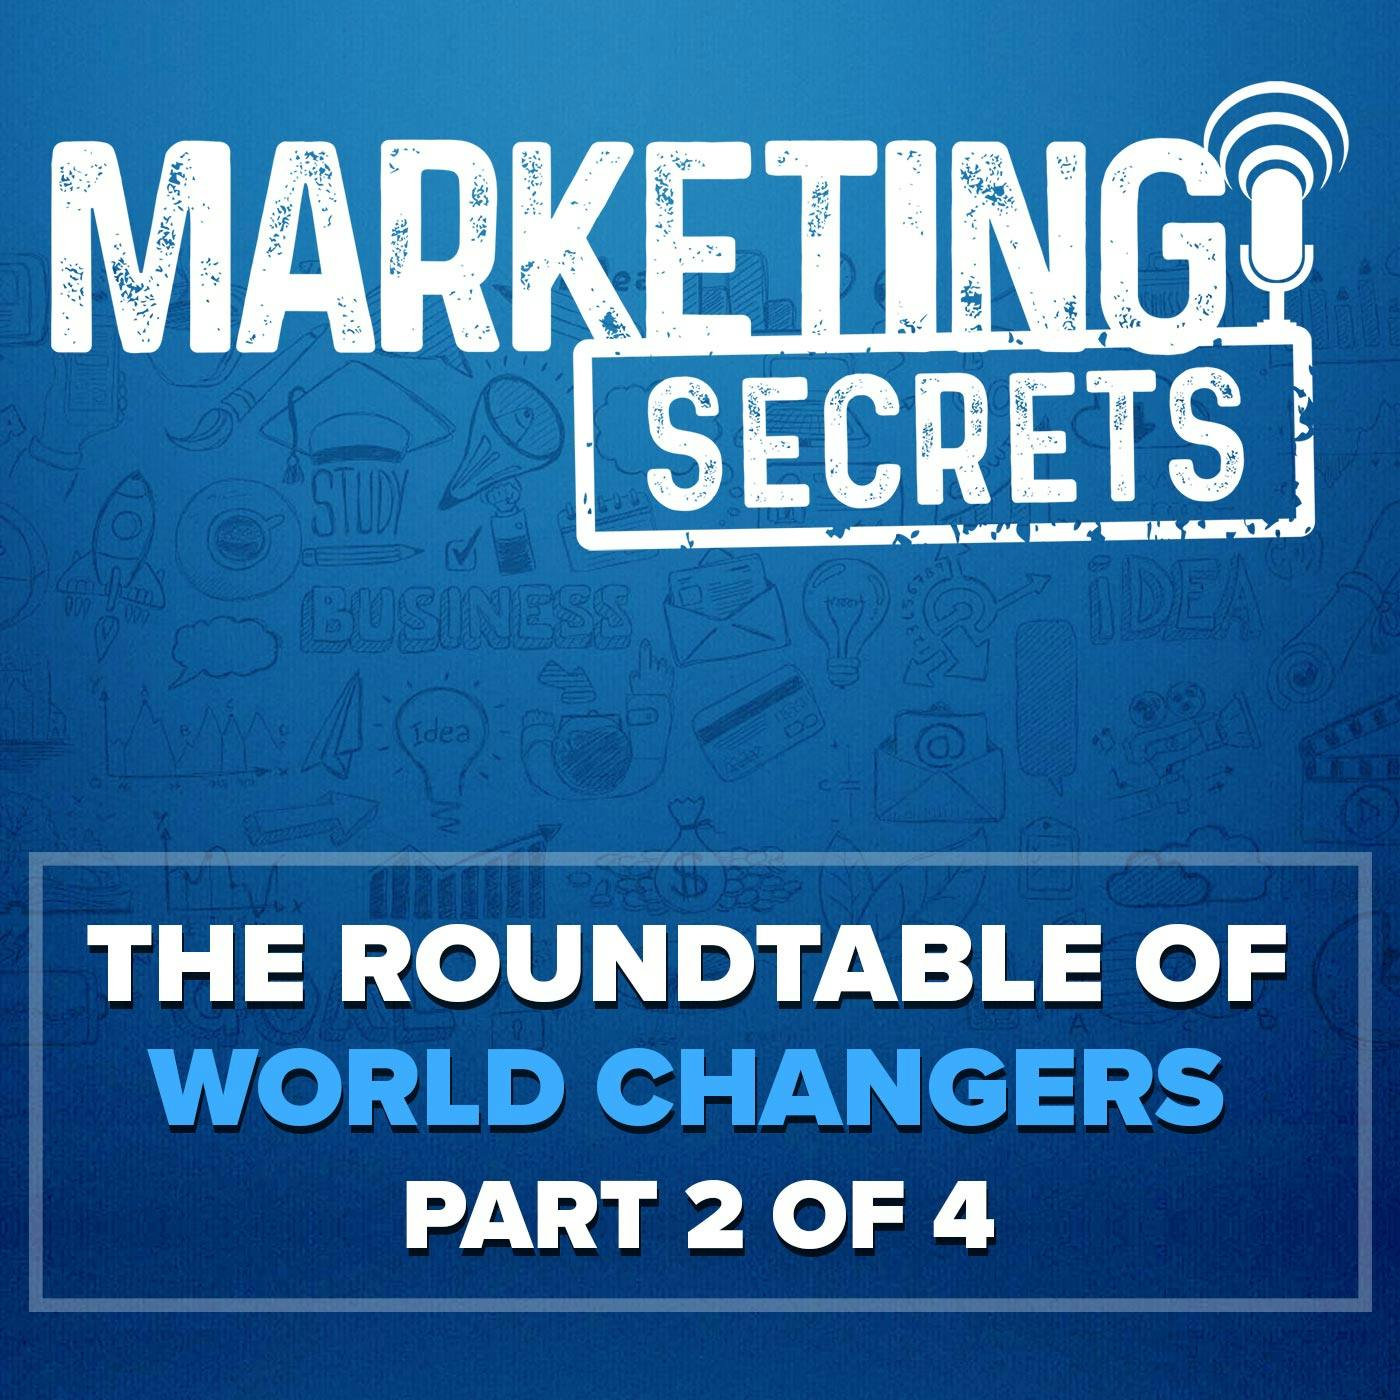 The Roundtable of World Changers (Part 2 of 4)